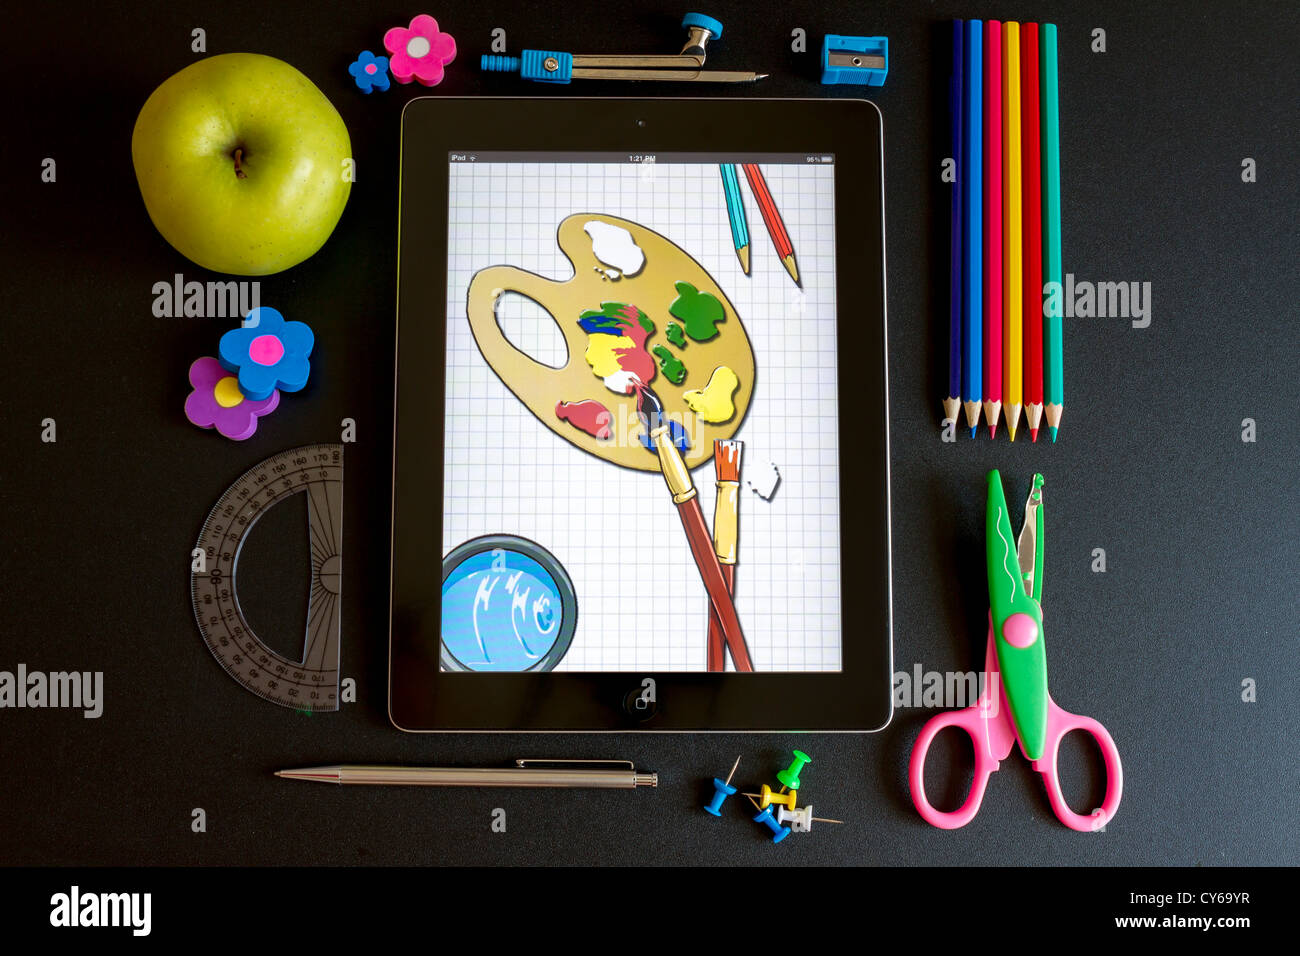 Ipad 3 with school accesories and drawing on the screen Stock Photo